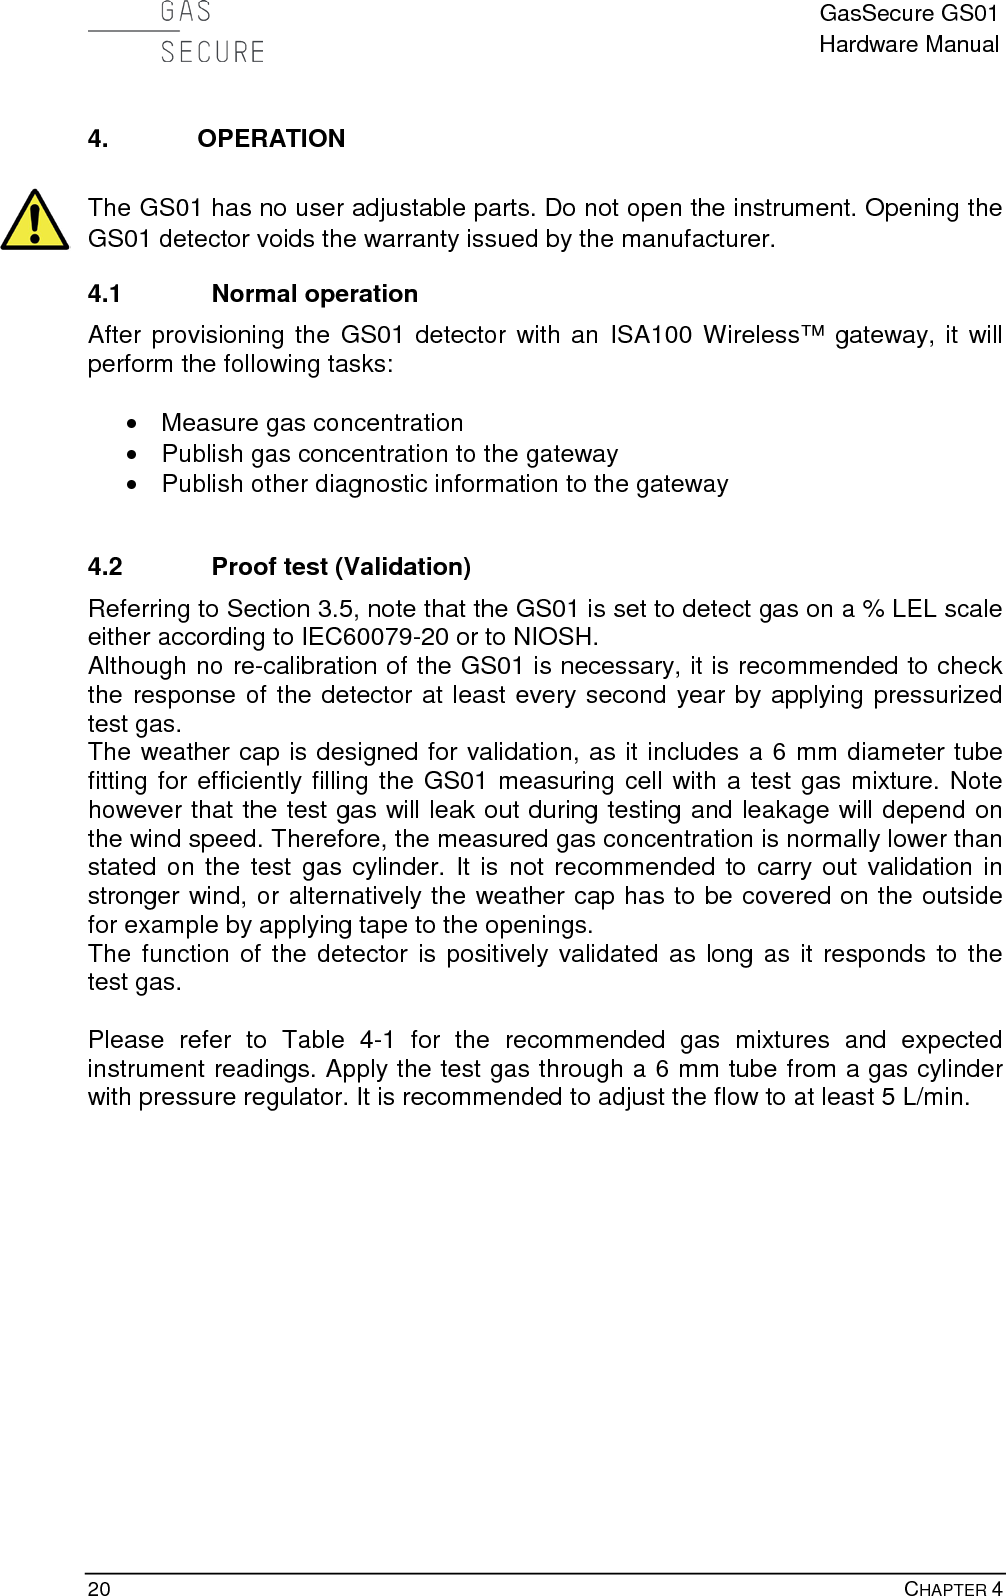  GasSecure GS01 Hardware Manual  20    CHAPTER 4 4. OPERATION  The GS01 has no user adjustable parts. Do not open the instrument. Opening the GS01 detector voids the warranty issued by the manufacturer. 4.1 Normal operation After provisioning the GS01 detector with an ISA100 Wireless™ gateway, it will perform the following tasks:   • Measure gas concentration • Publish gas concentration to the gateway • Publish other diagnostic information to the gateway  4.2 Proof test (Validation) Referring to Section 3.5, note that the GS01 is set to detect gas on a % LEL scale either according to IEC60079-20 or to NIOSH.  Although no re-calibration of the GS01 is necessary, it is recommended to check the response of the detector at least every second year by applying pressurized test gas.  The weather cap is designed for validation, as it includes a 6 mm diameter tube fitting for efficiently filling the GS01 measuring cell with a test gas mixture. Note however that the test gas will leak out during testing and leakage will depend on the wind speed. Therefore, the measured gas concentration is normally lower than stated on the test gas cylinder. It is not recommended to carry out validation in stronger wind, or alternatively the weather cap has to be covered on the outside for example by applying tape to the openings. The function of the detector is positively validated as long as it responds to the test gas.   Please refer to Table  4-1  for the  recommended gas mixtures and expected instrument readings. Apply the test gas through a 6 mm tube from a gas cylinder with pressure regulator. It is recommended to adjust the flow to at least 5 L/min.               